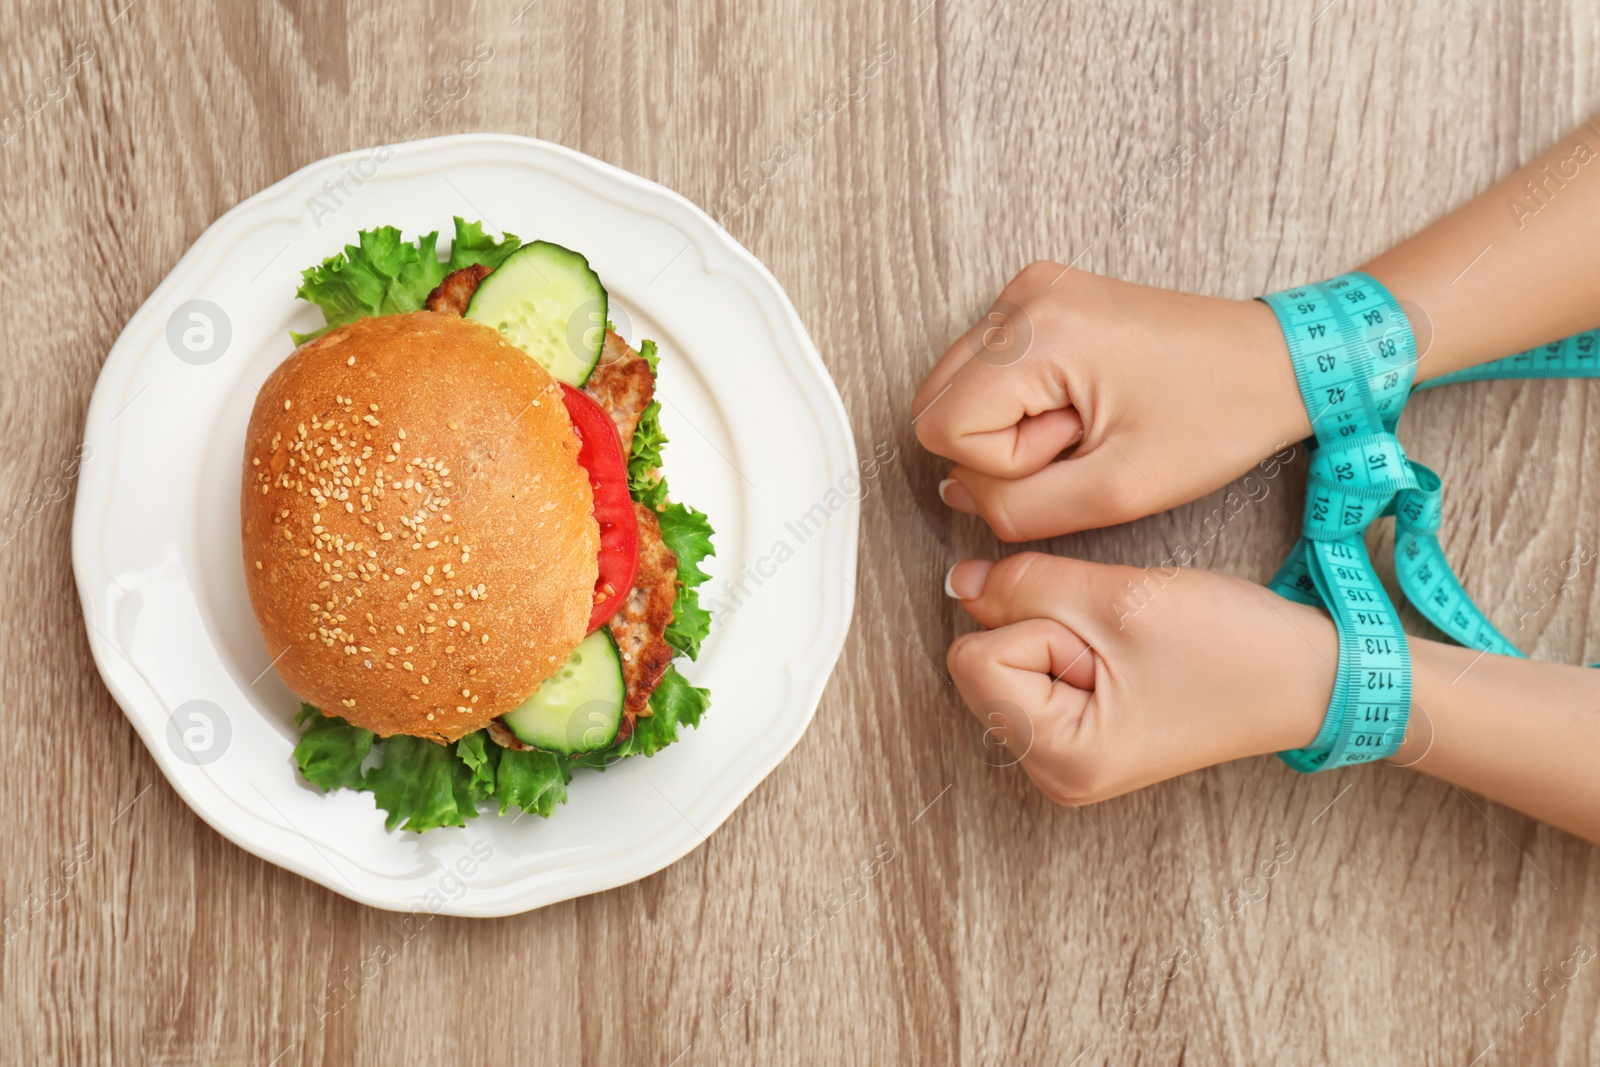 Photo of Woman holding tied hands with measuring tape near tasty sandwich on wooden table, top view. Healthy diet